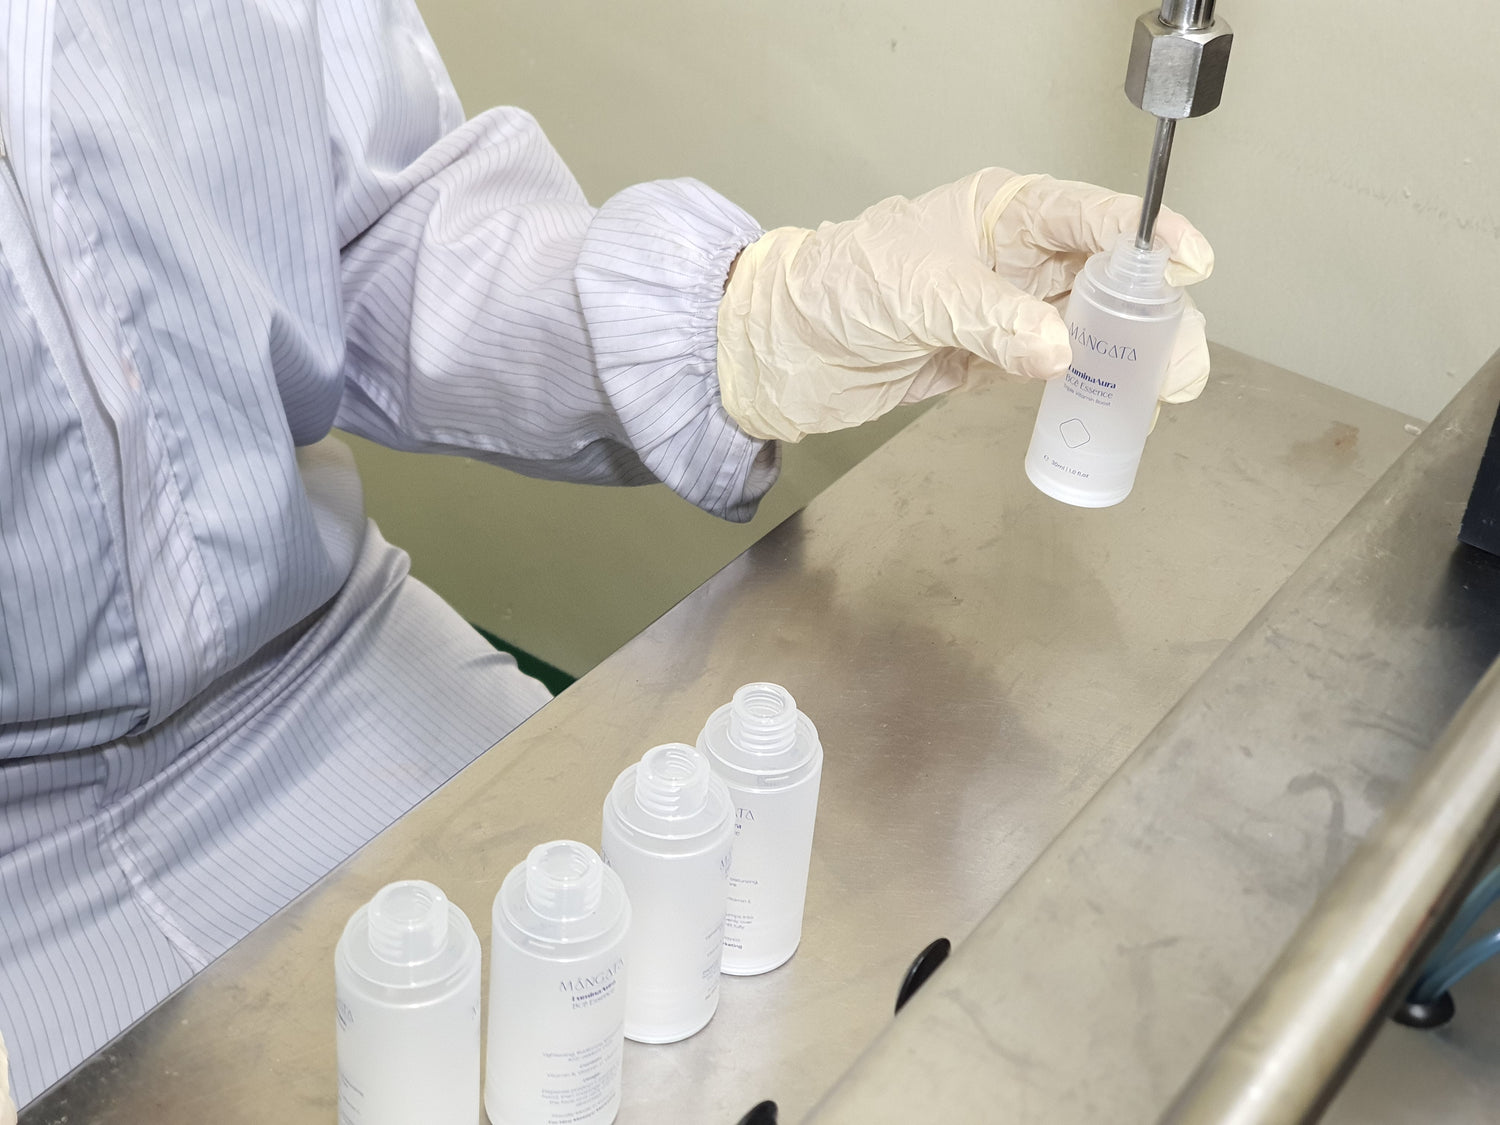 Operator holding a skincare bottle under the filling machine head, ready for it to be filled with product.